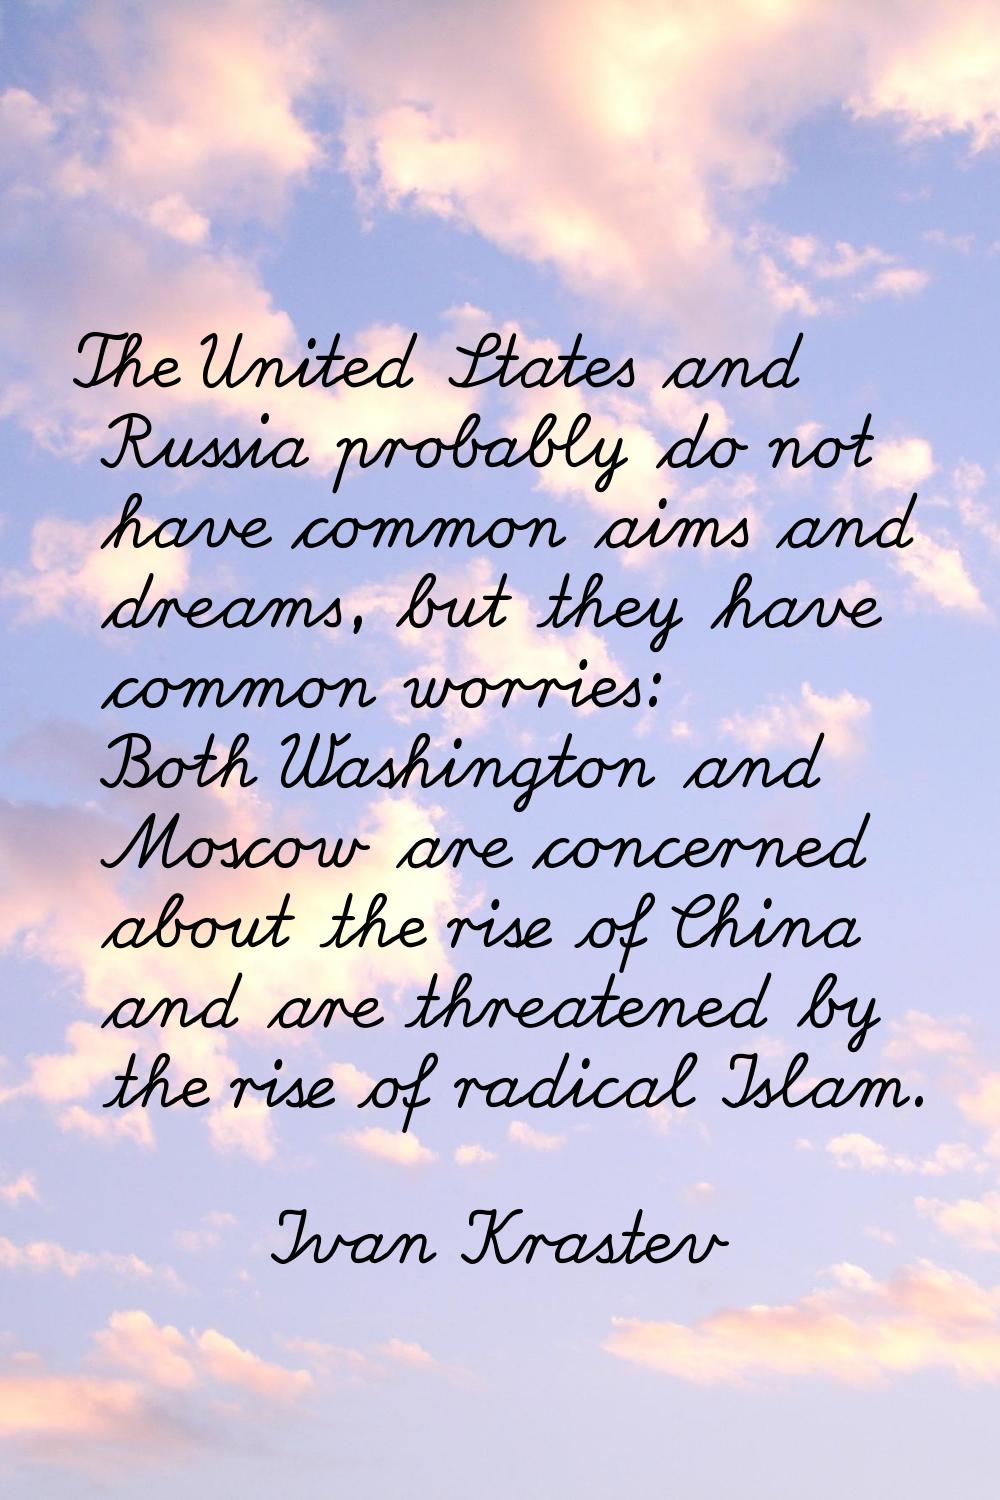 The United States and Russia probably do not have common aims and dreams, but they have common worr